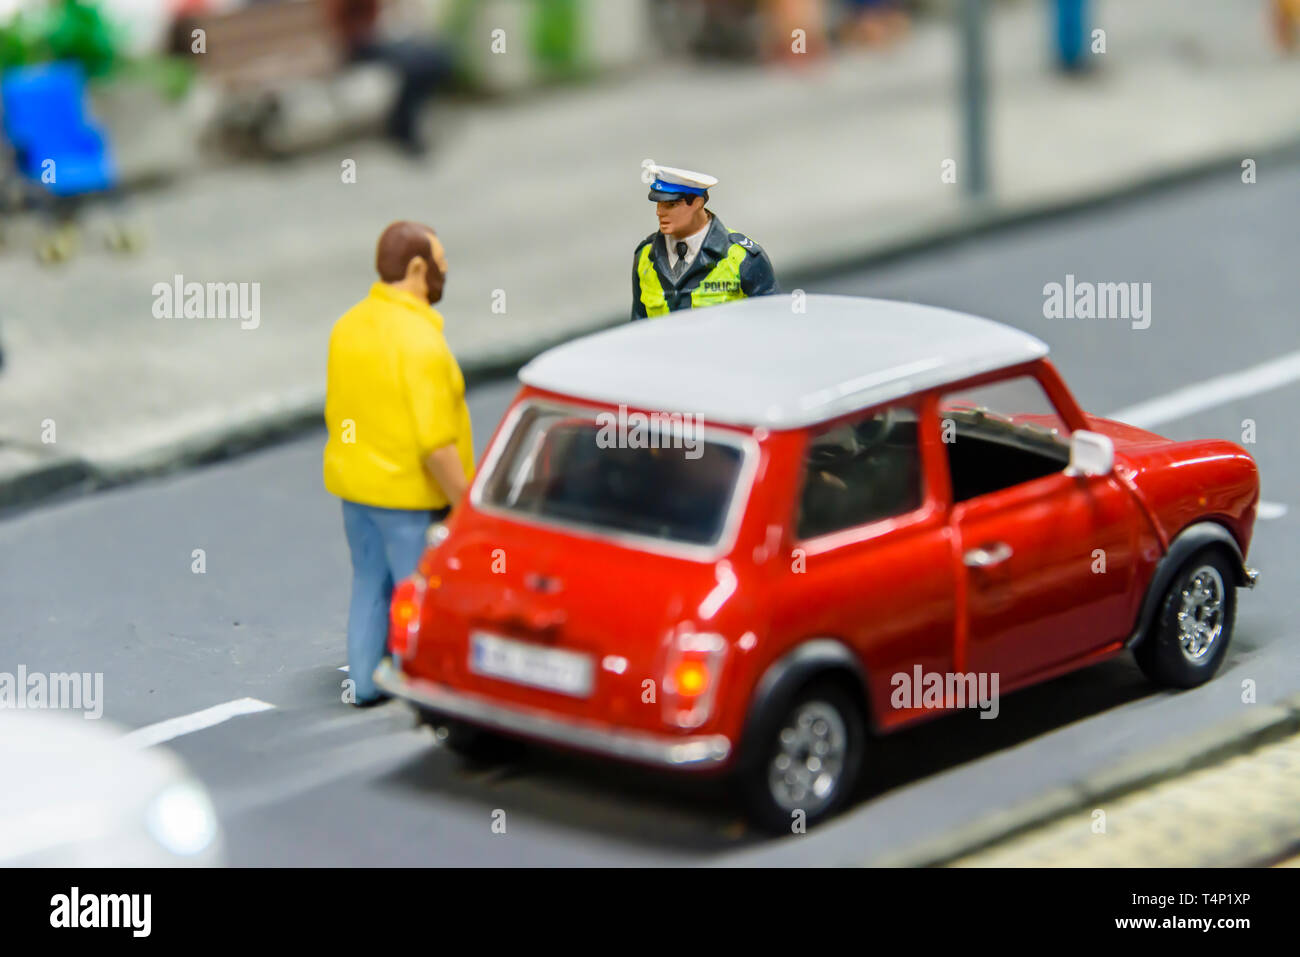 Miniature model of a driver stopped by a police officer, at Kolejkowo, Wrocław, Wroclaw, Wroklaw, Poland Stock Photo